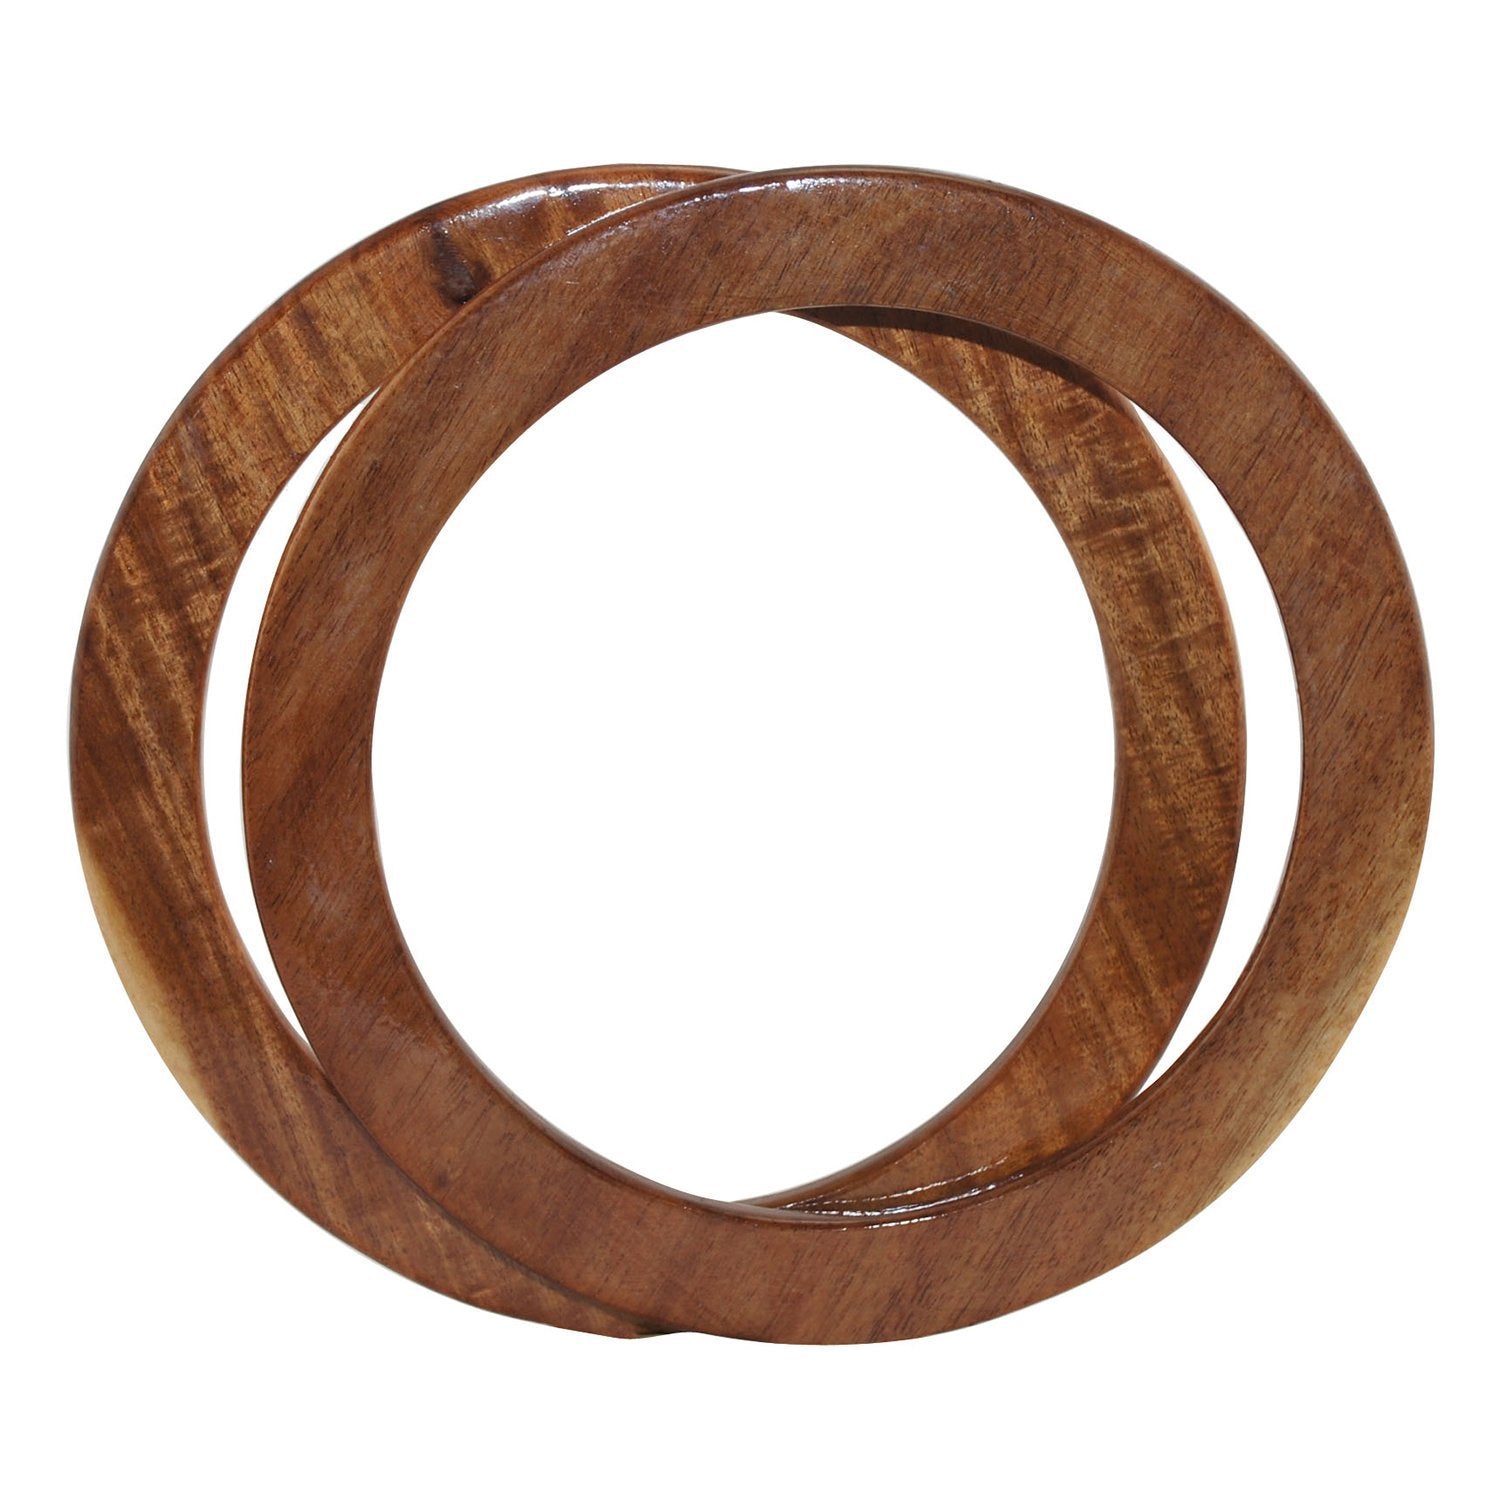 Shop SUPERFINDINGS 2Pcs Wooden Round Purse Handle 3.46 inch Round